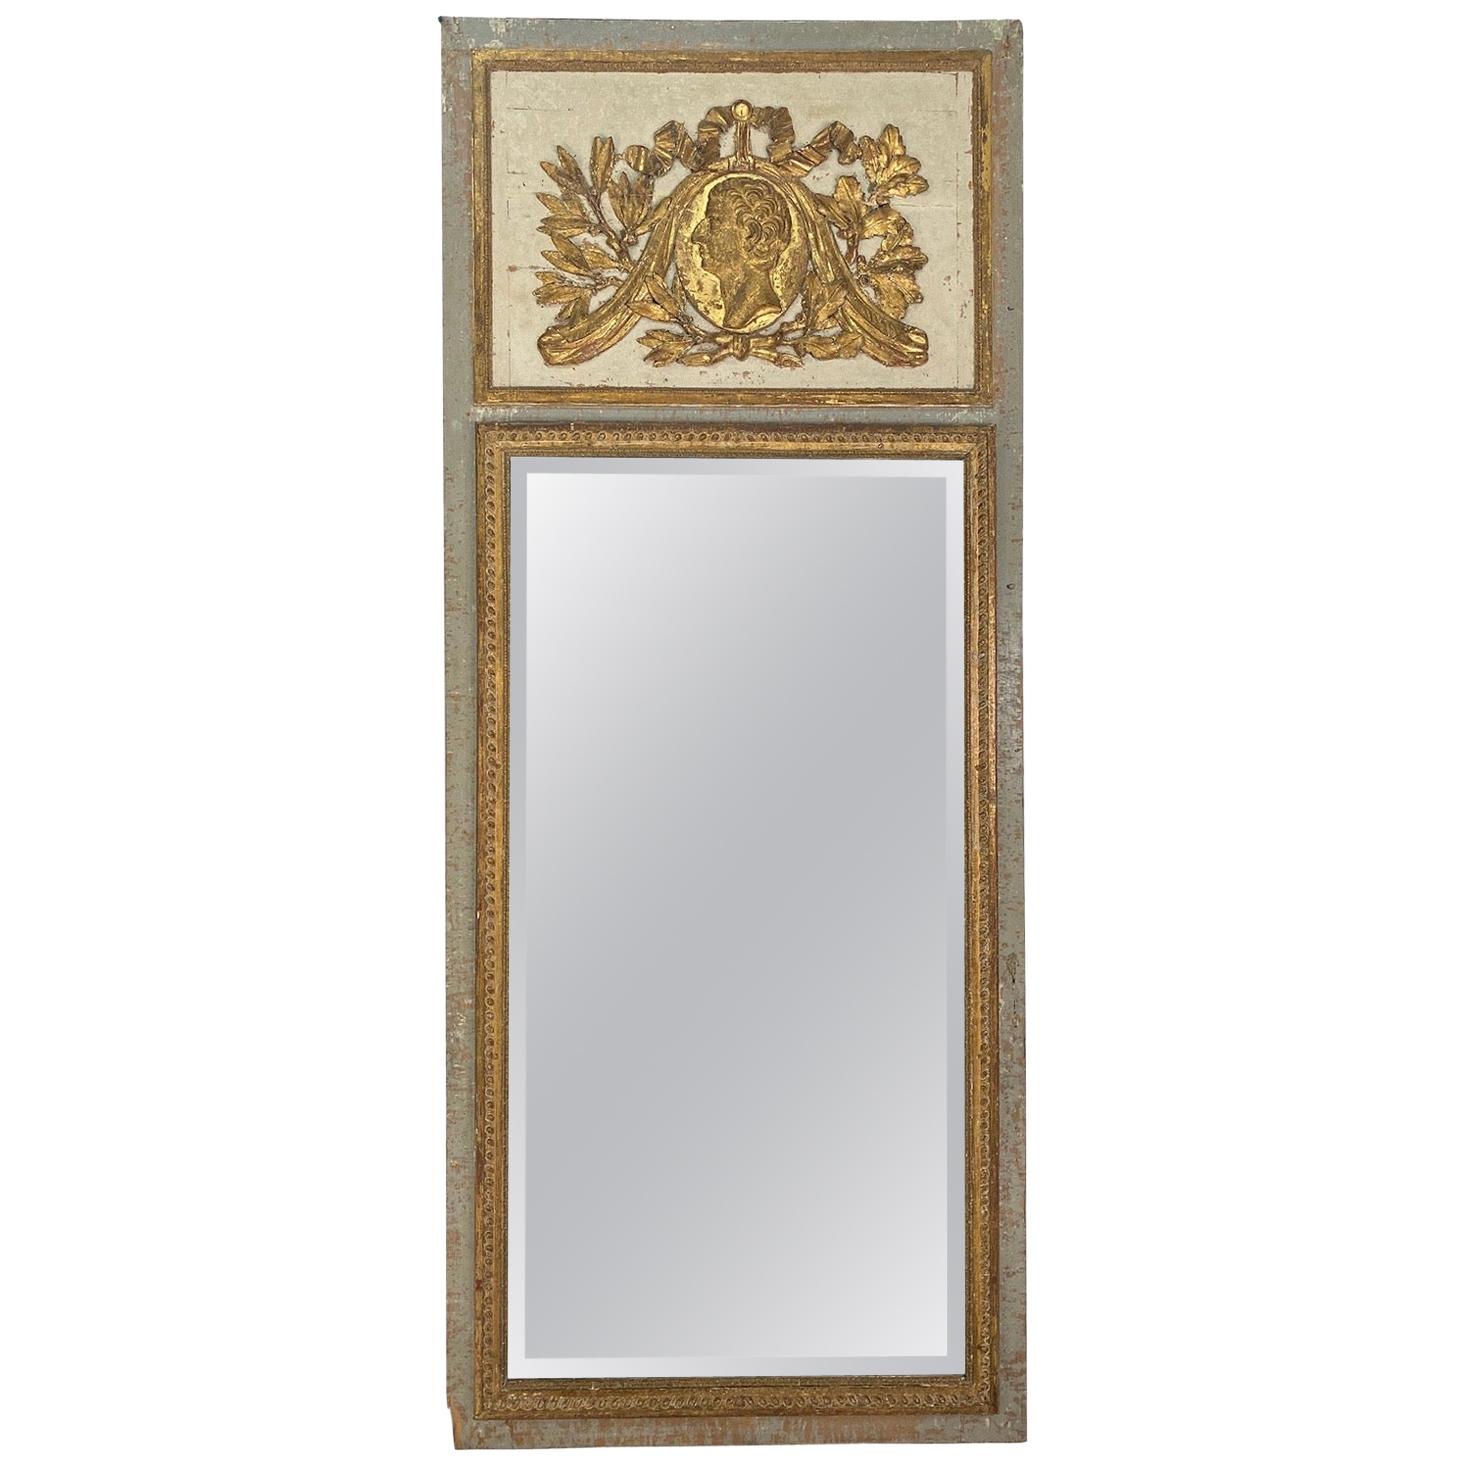 18th Century French Louis XVI Painted and Gilded Wooden Trumeau Mirror